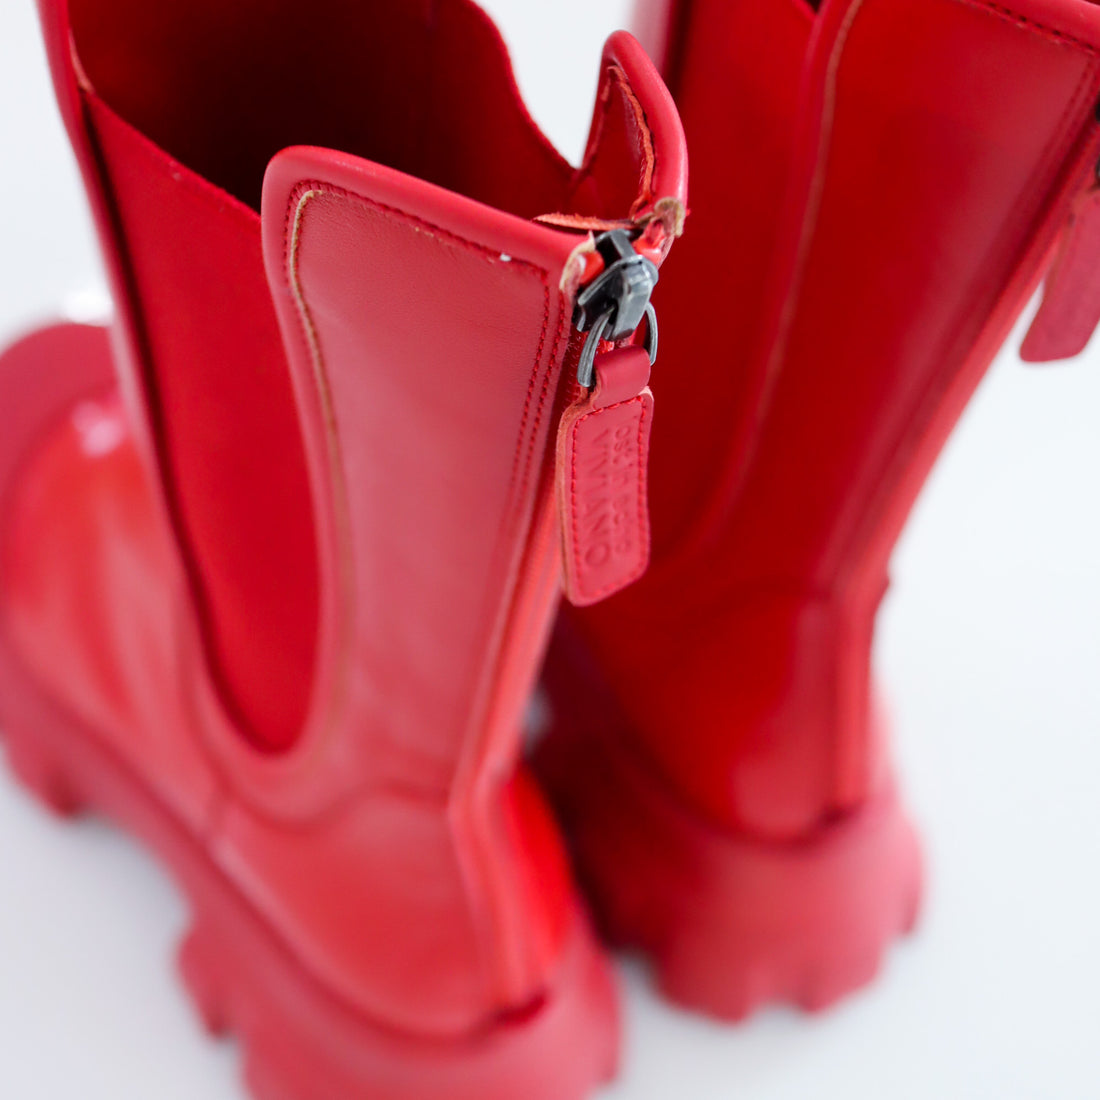 VIVIANO  SIDE GORE BOOTS RED